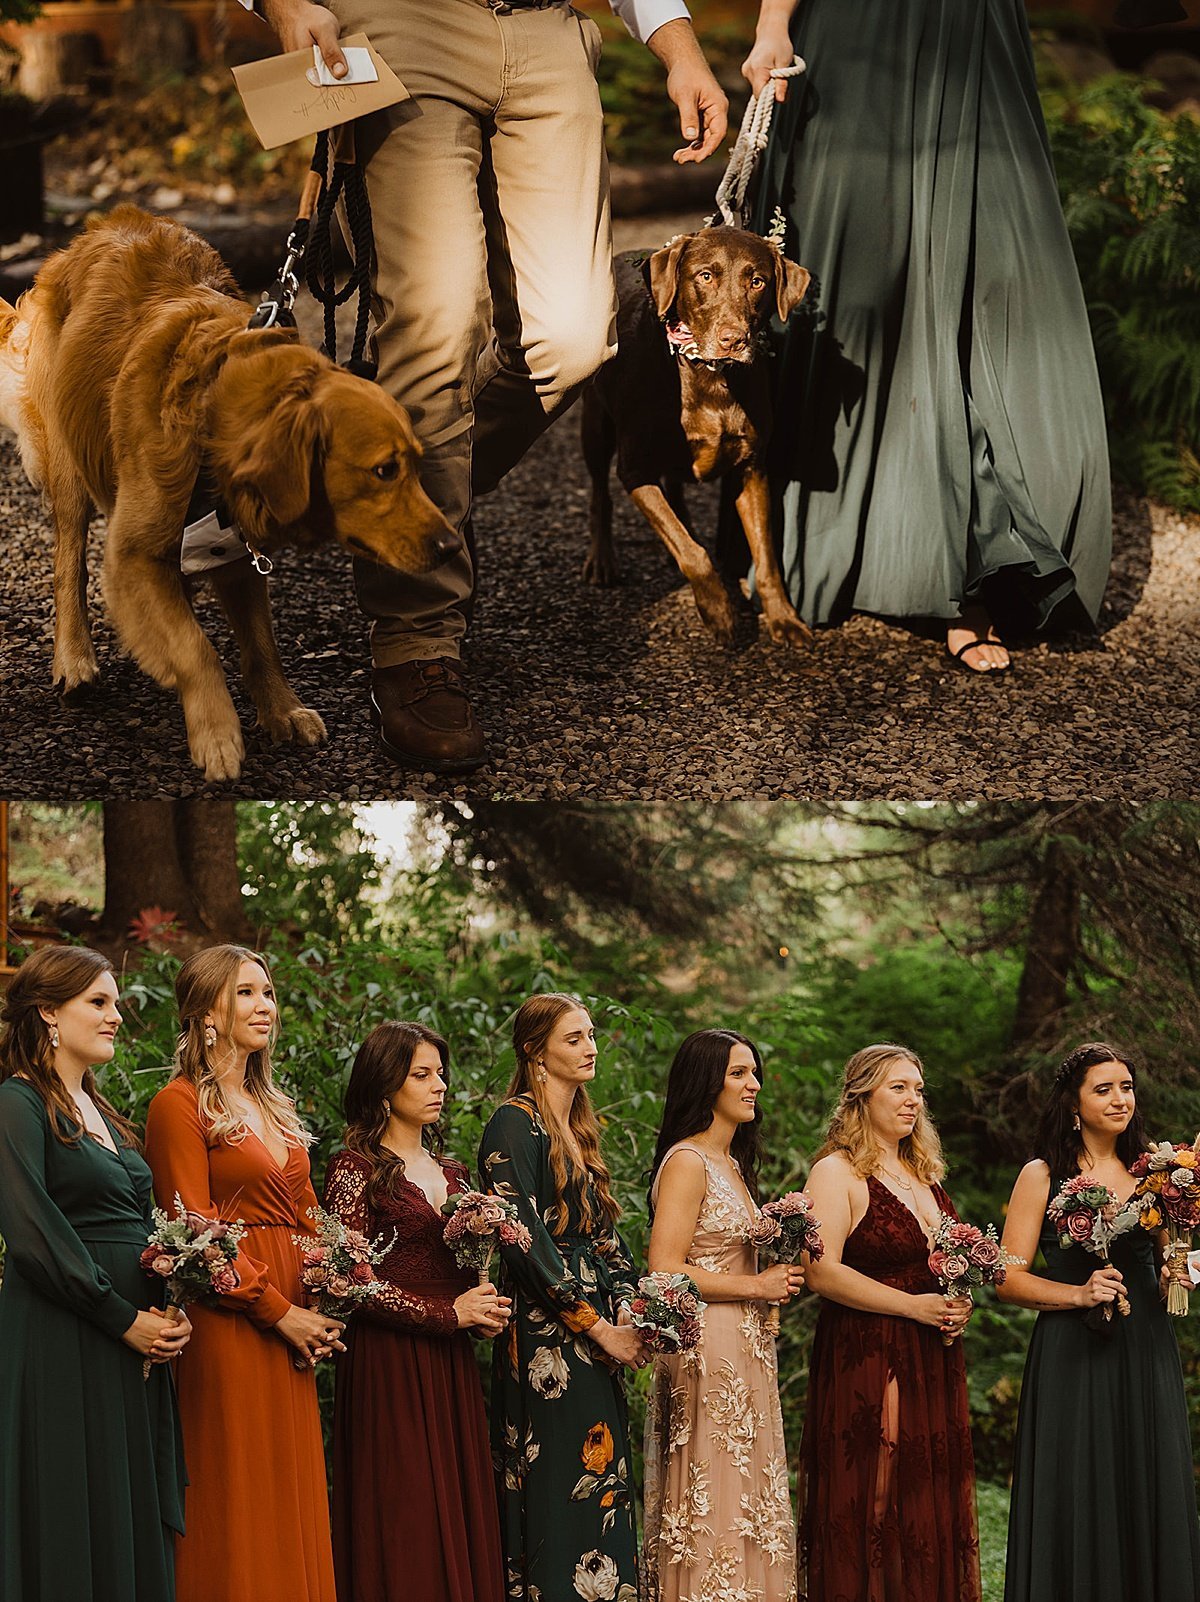  Bride and groom’s two puppies walk the aisle as bridesmaids in jewel-tone velvet dresses look on during ceremony shot by alaska wedding photographer 